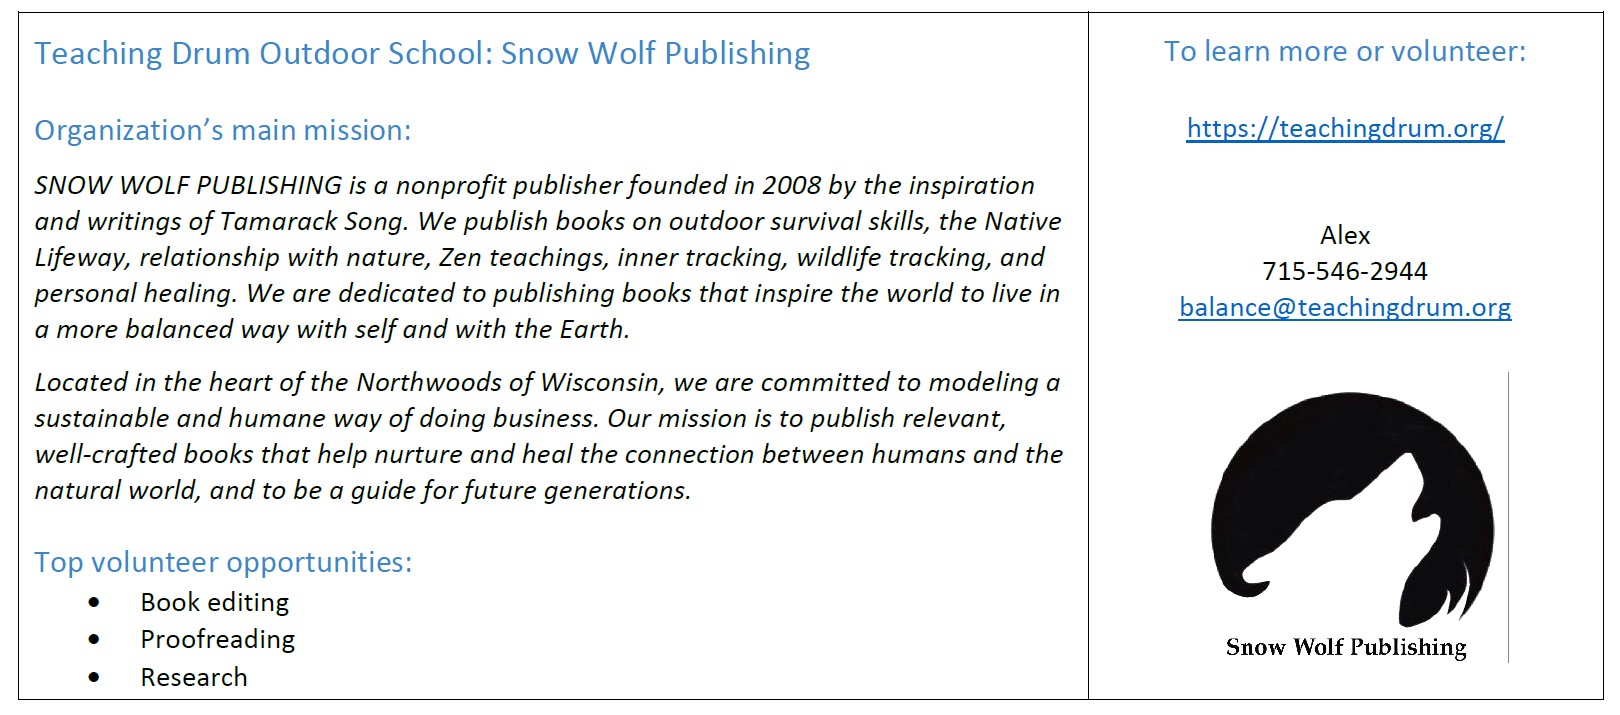 Volunteer opportunities at Snow Wolf Publishing